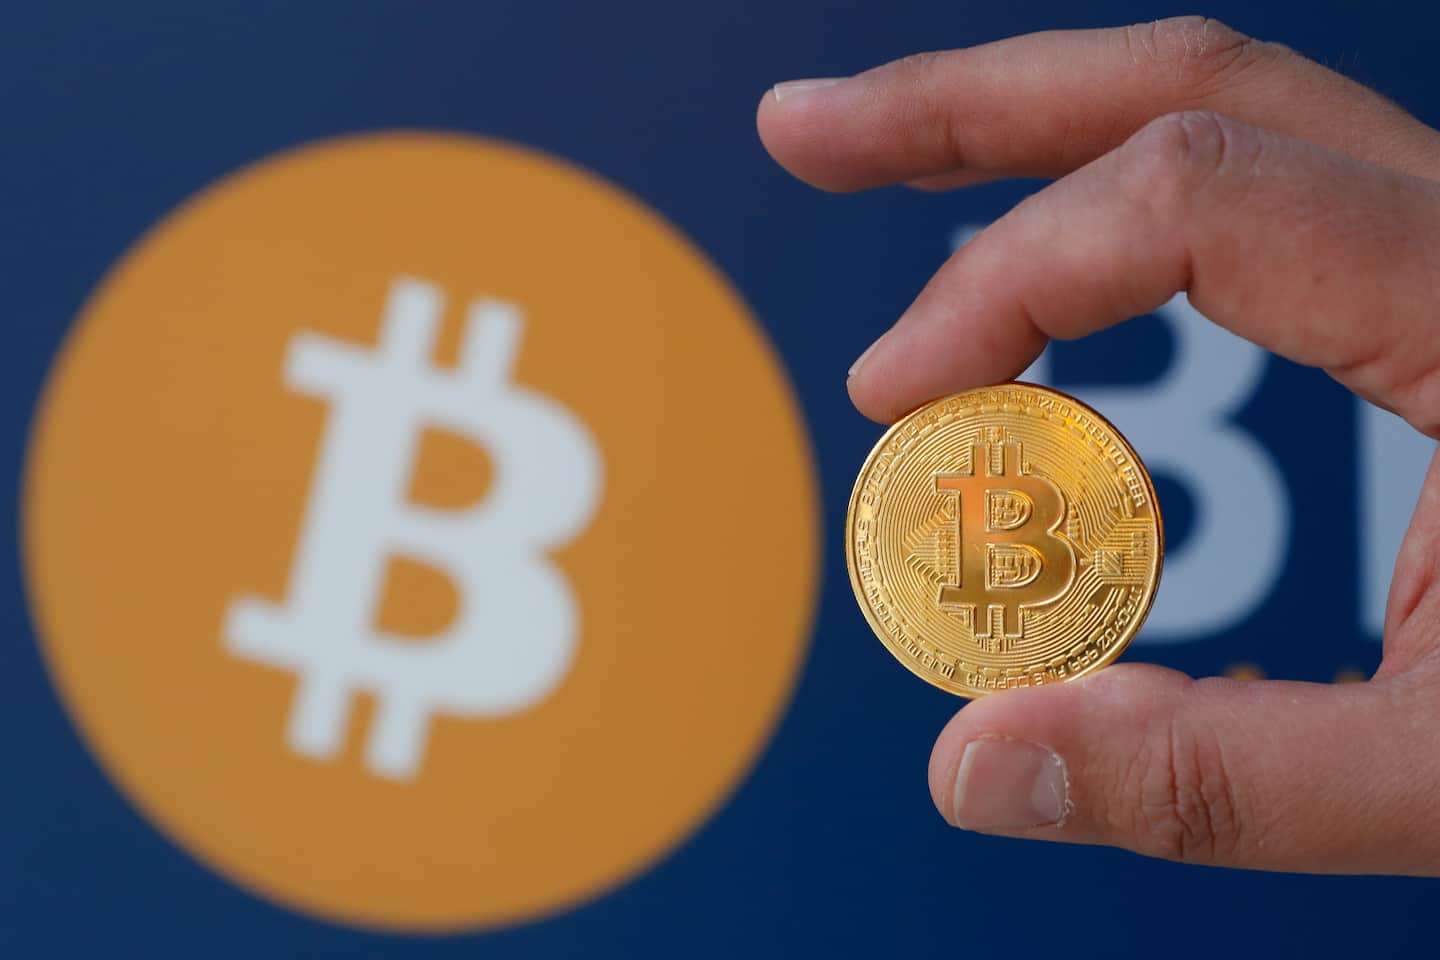 Opinion: Bitcoin’s value isn’t apparent